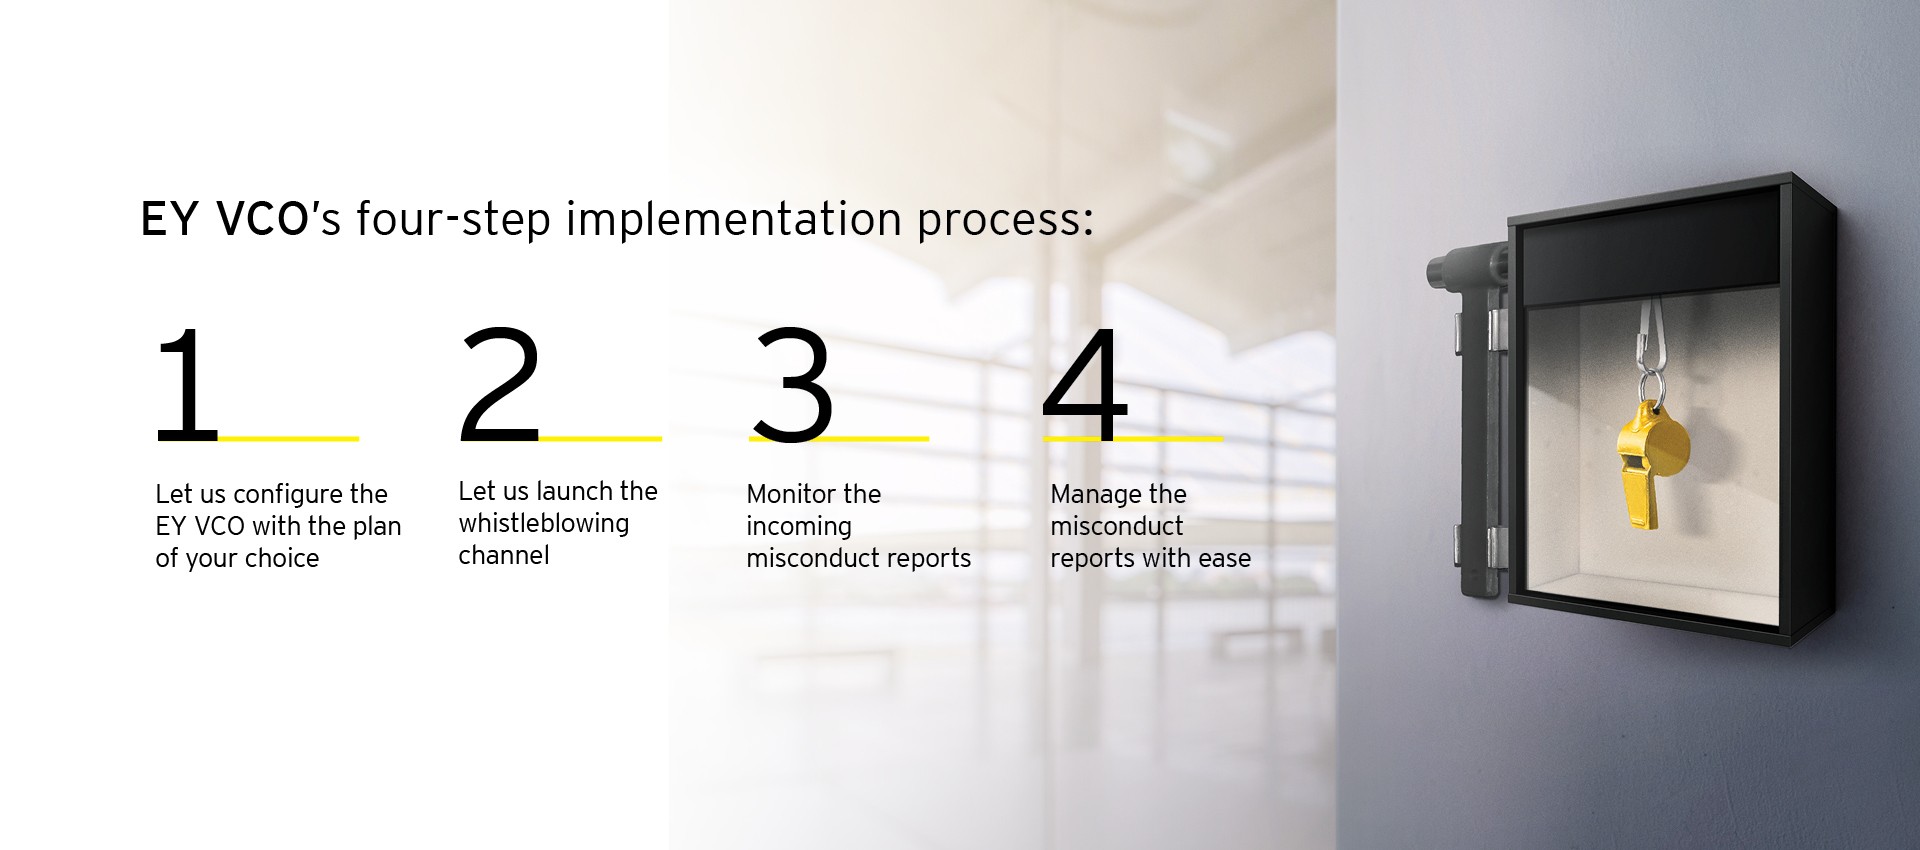 Tool implementation process